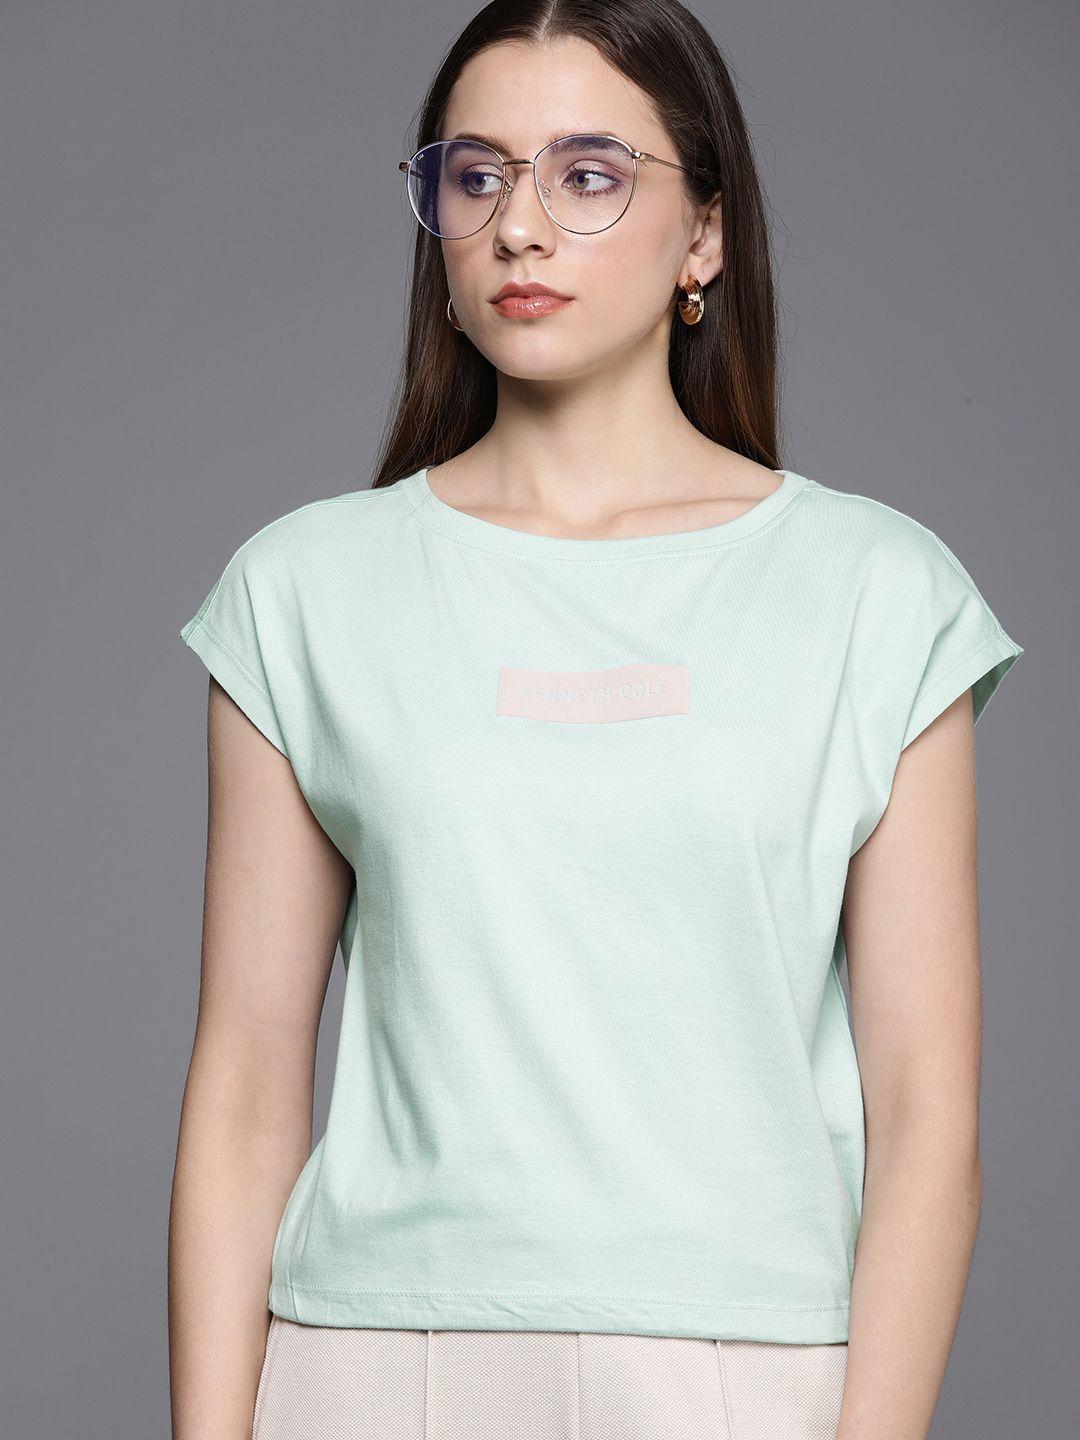 kenneth cole signature tee women green brand logo printed pure cotton t-shirt